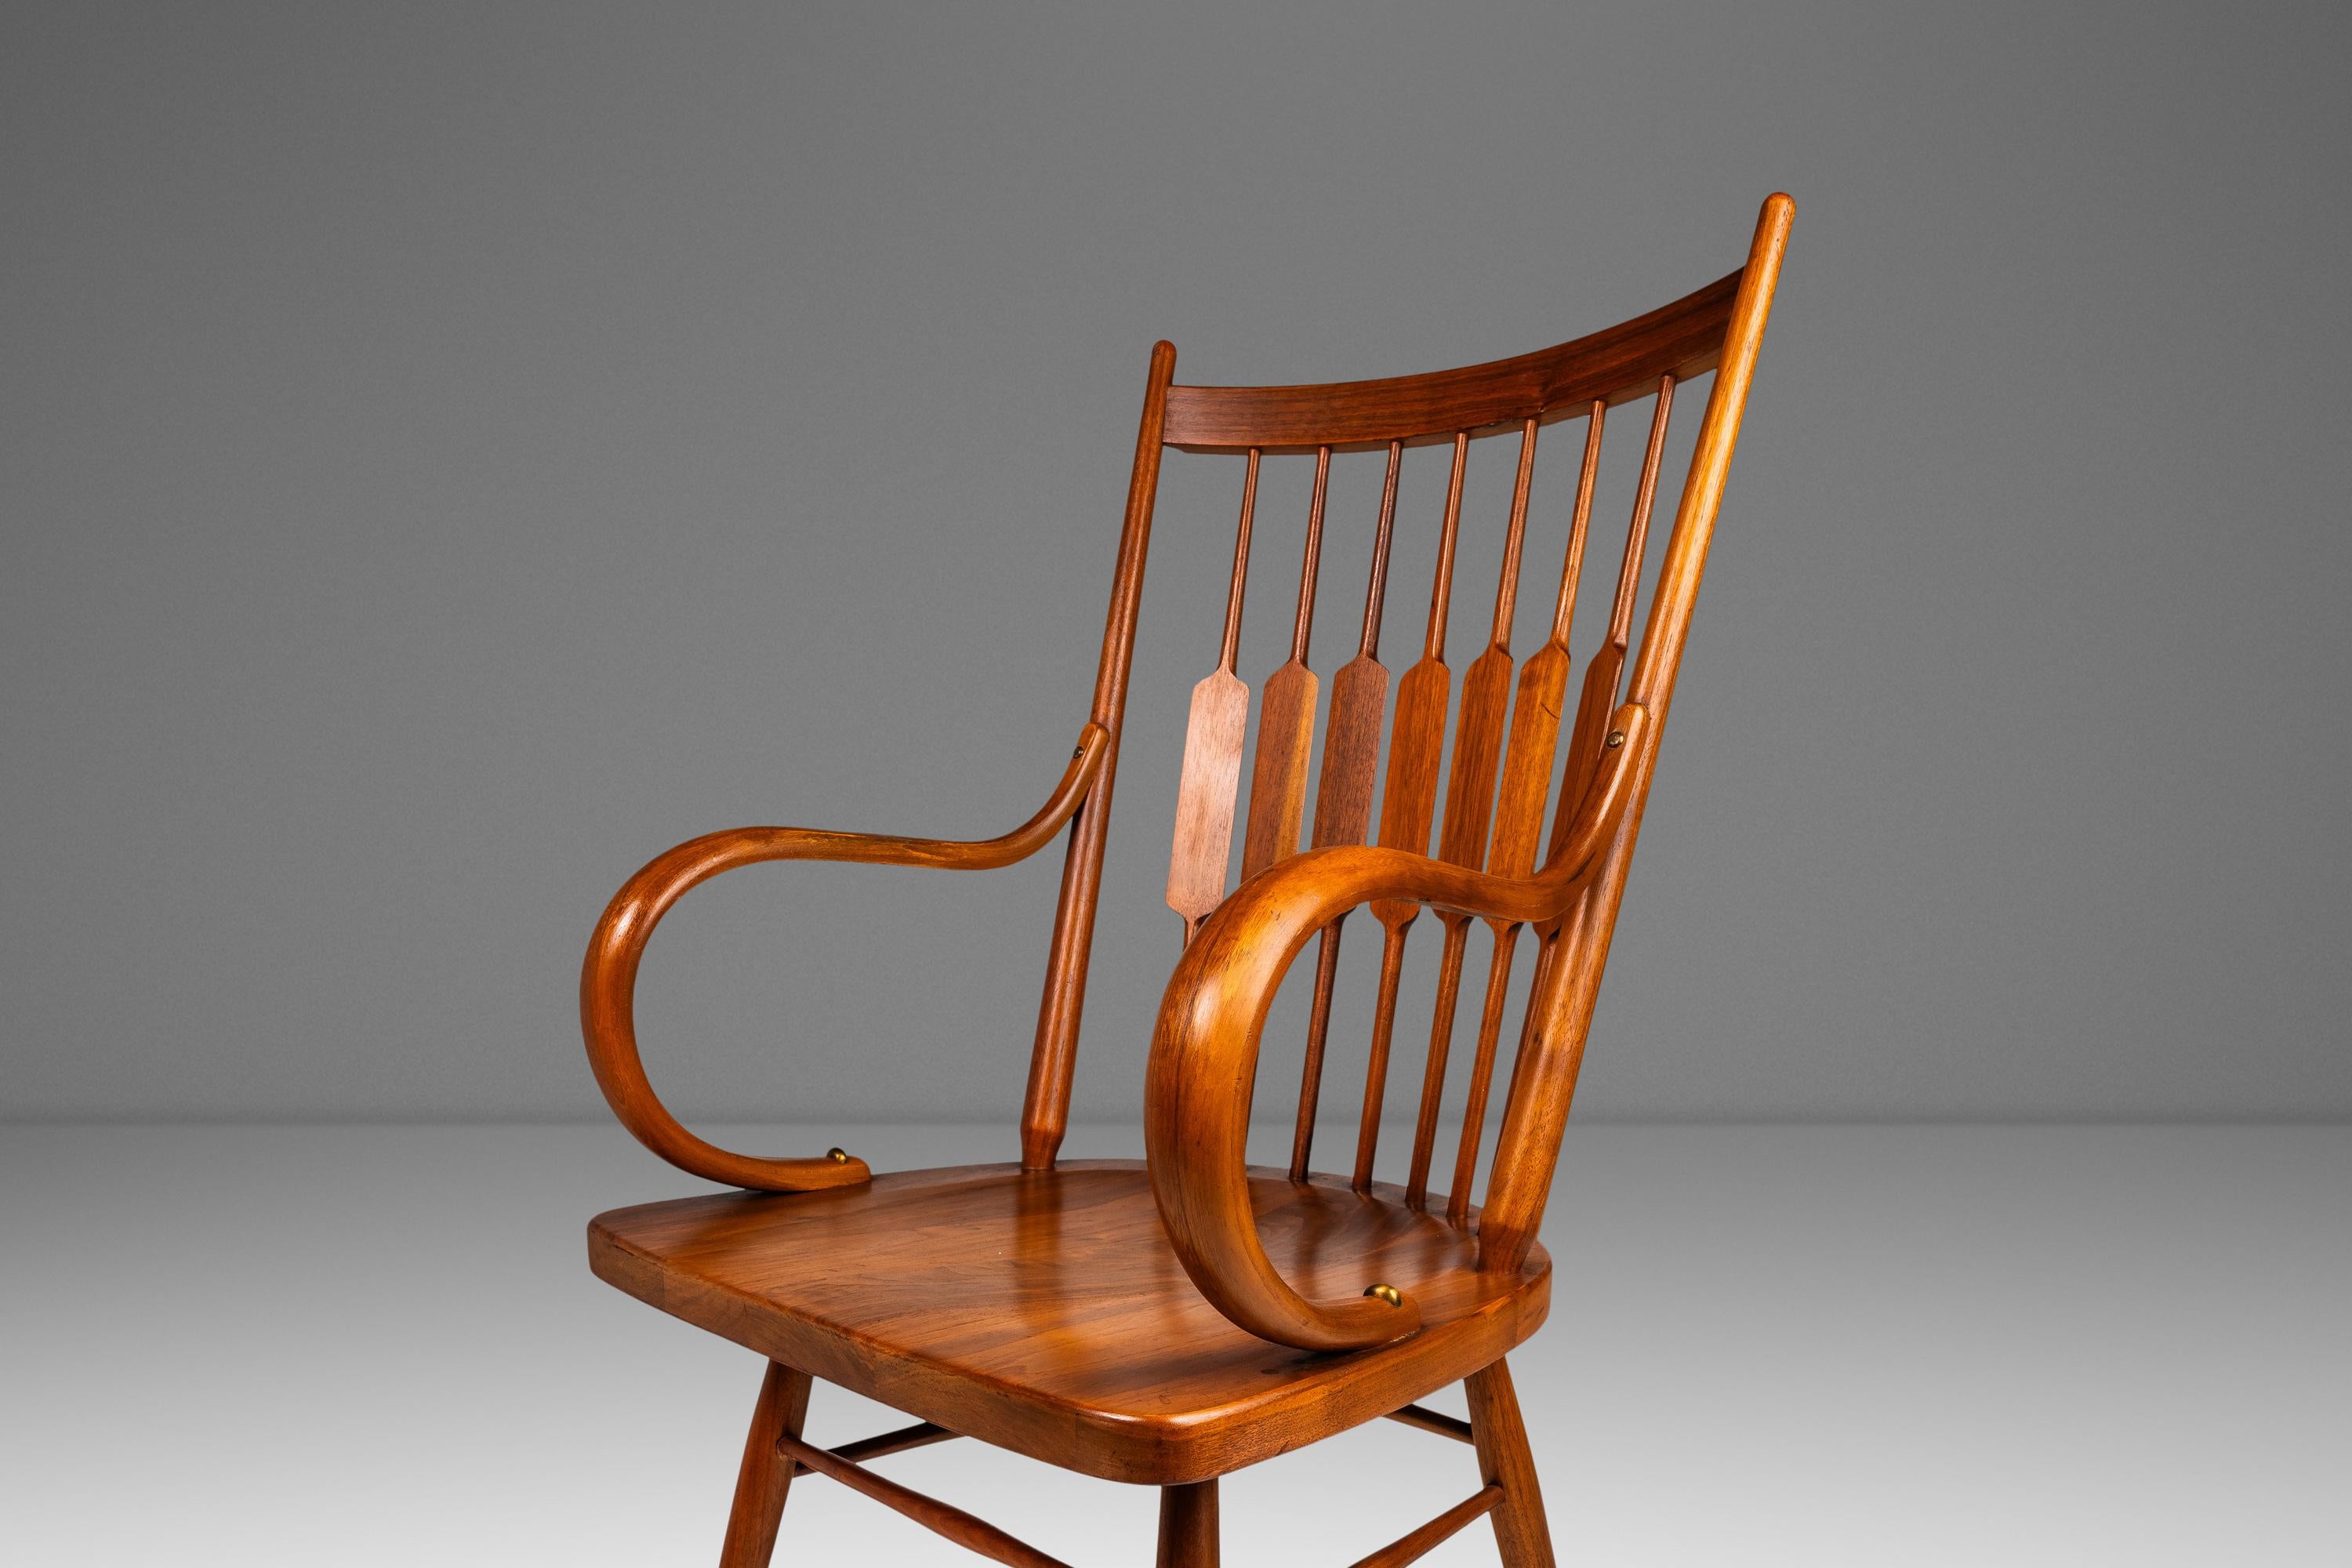 Set of 2 Windsor Chairs in Solid Walnut by Kipp Stewart for Drexel, USA, c. 1960 For Sale 6